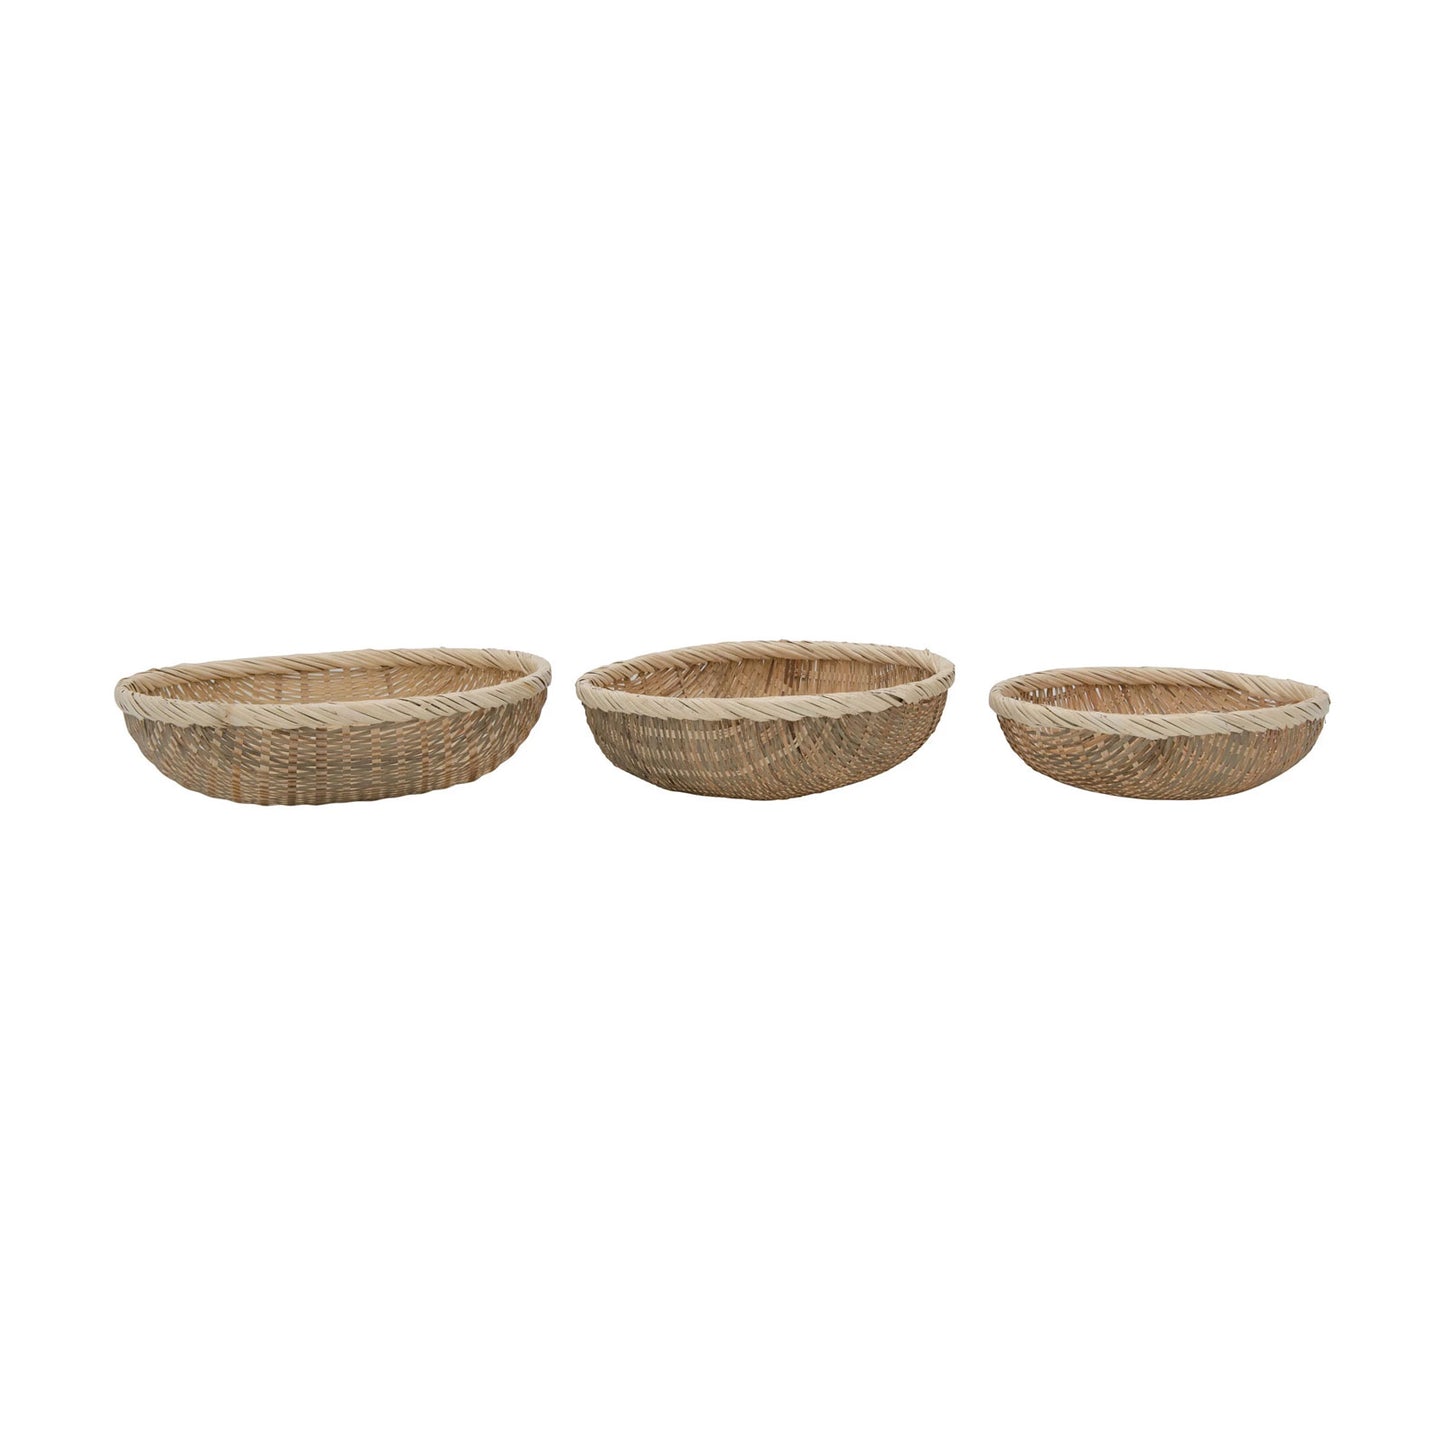 Shallow Hand-Woven Bamboo Baskets, Set of 3